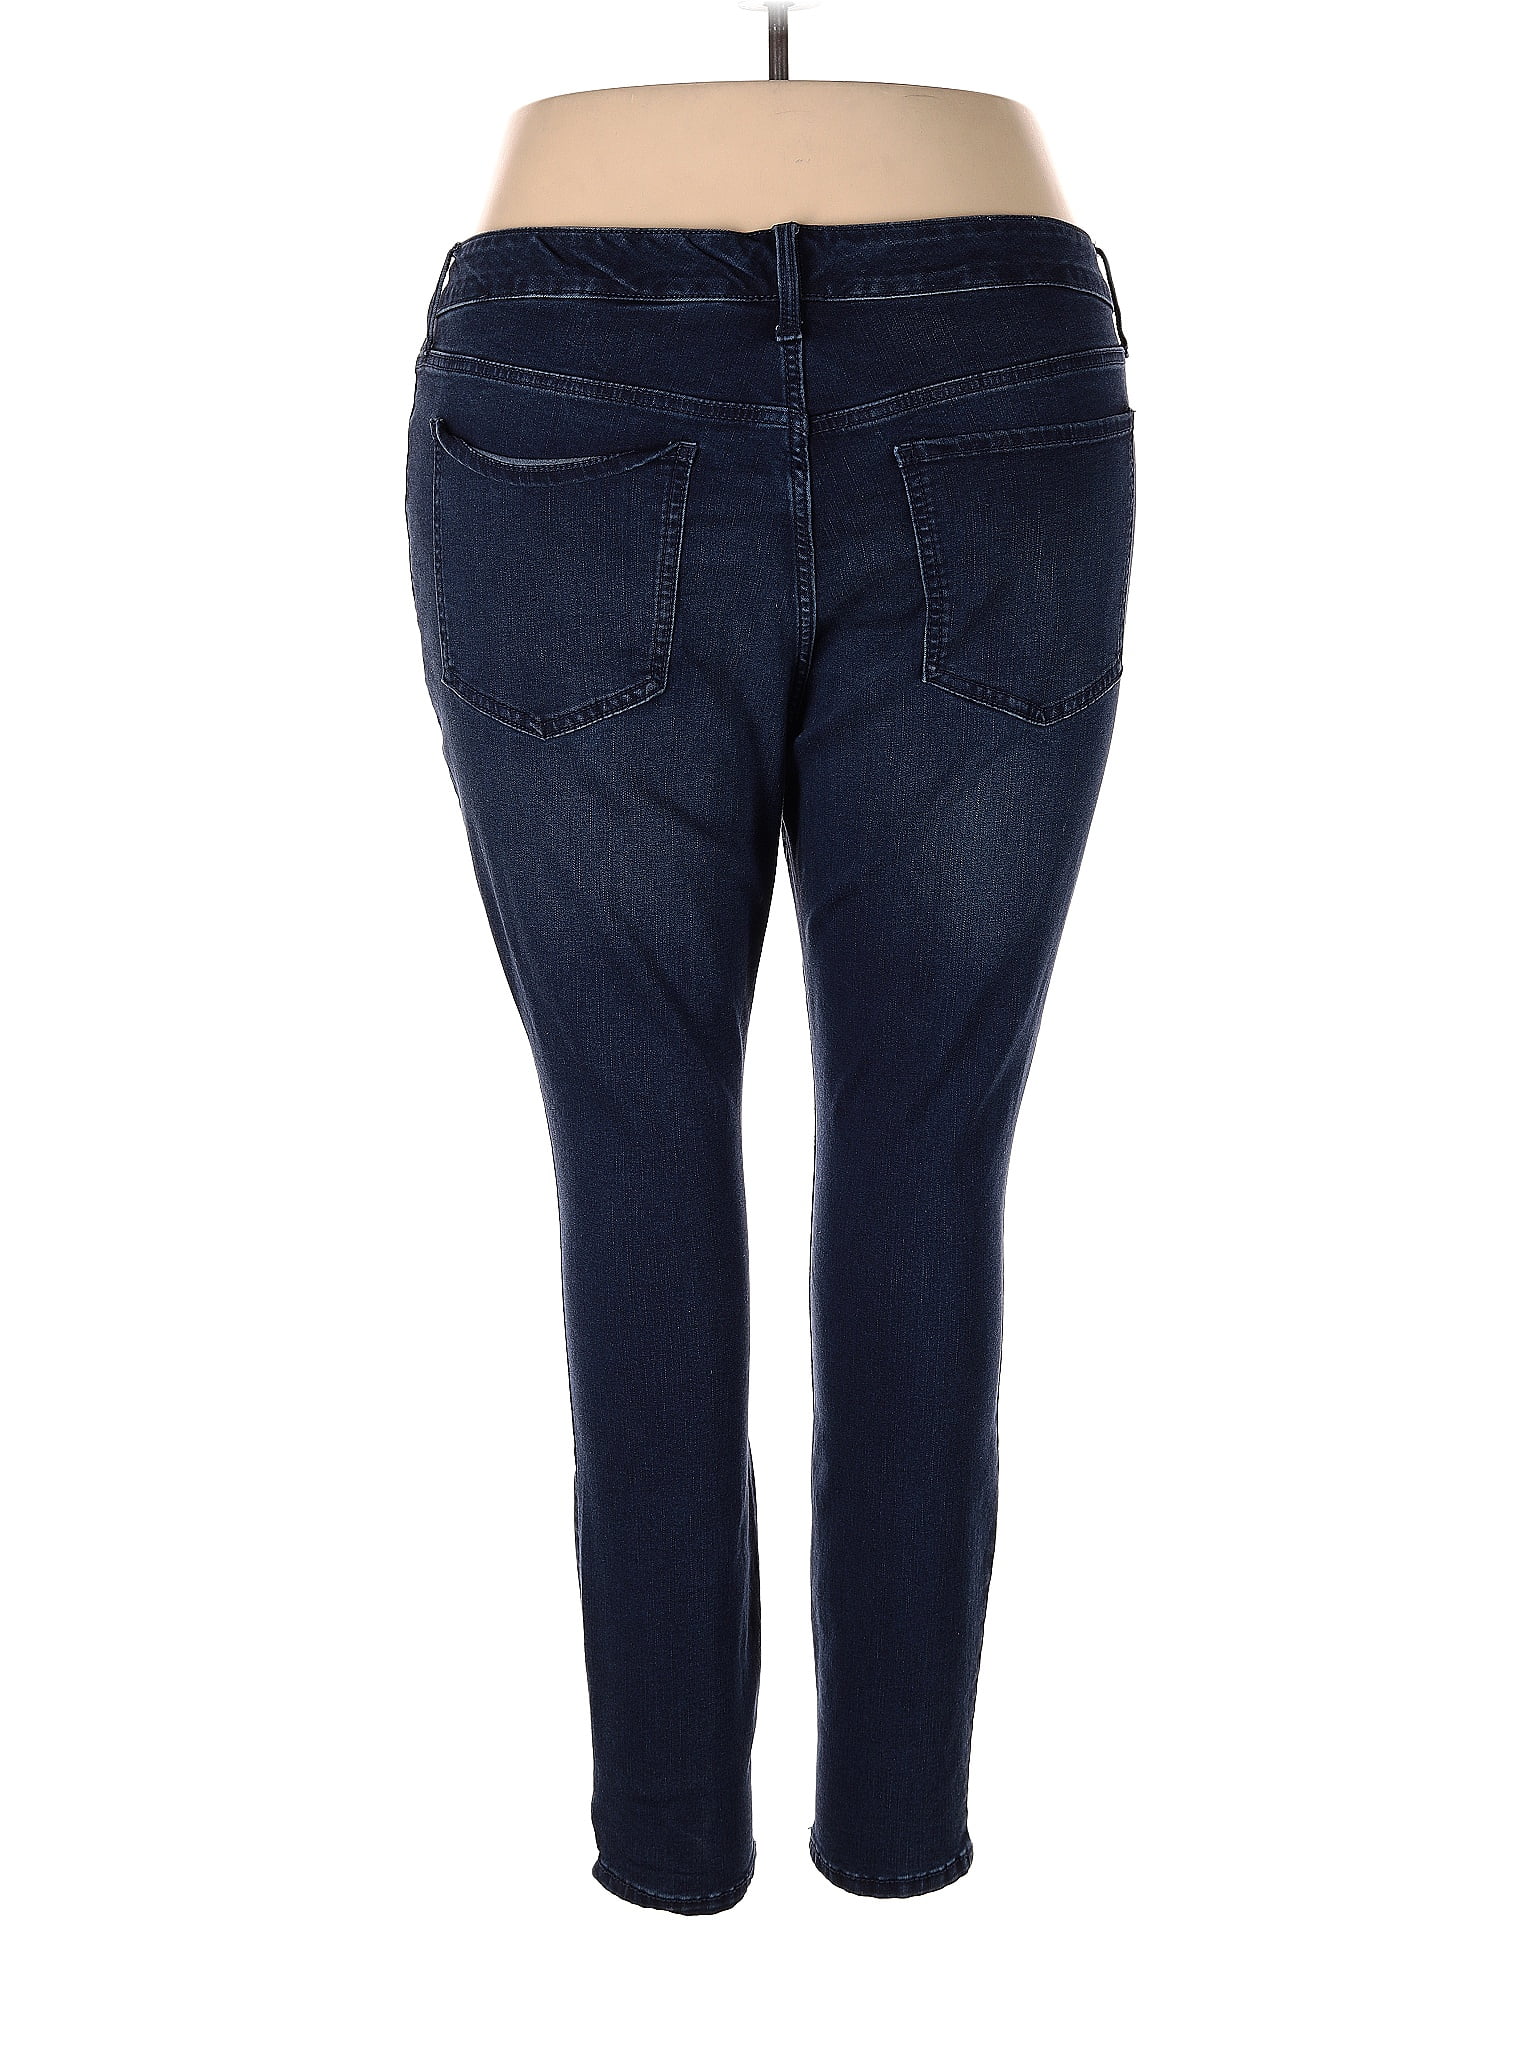 Terra & Sky Solid Navy Blue Jeans Size 2X (Plus) - 28% off